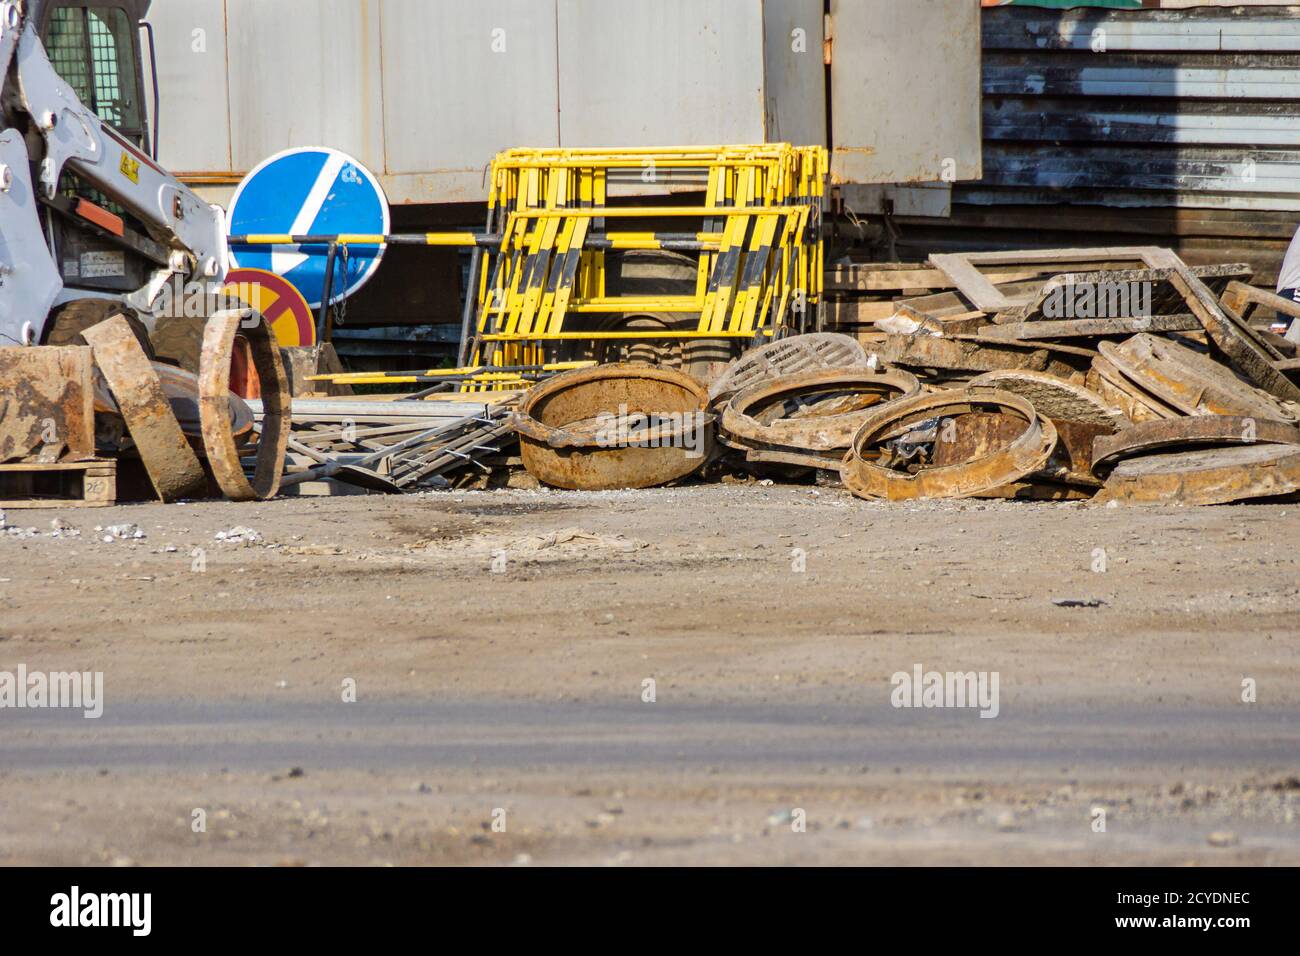 bulk of old manhole wellsold manholes of wells piled in a heap, next to temporary road signs and emergency barriers Stock Photo